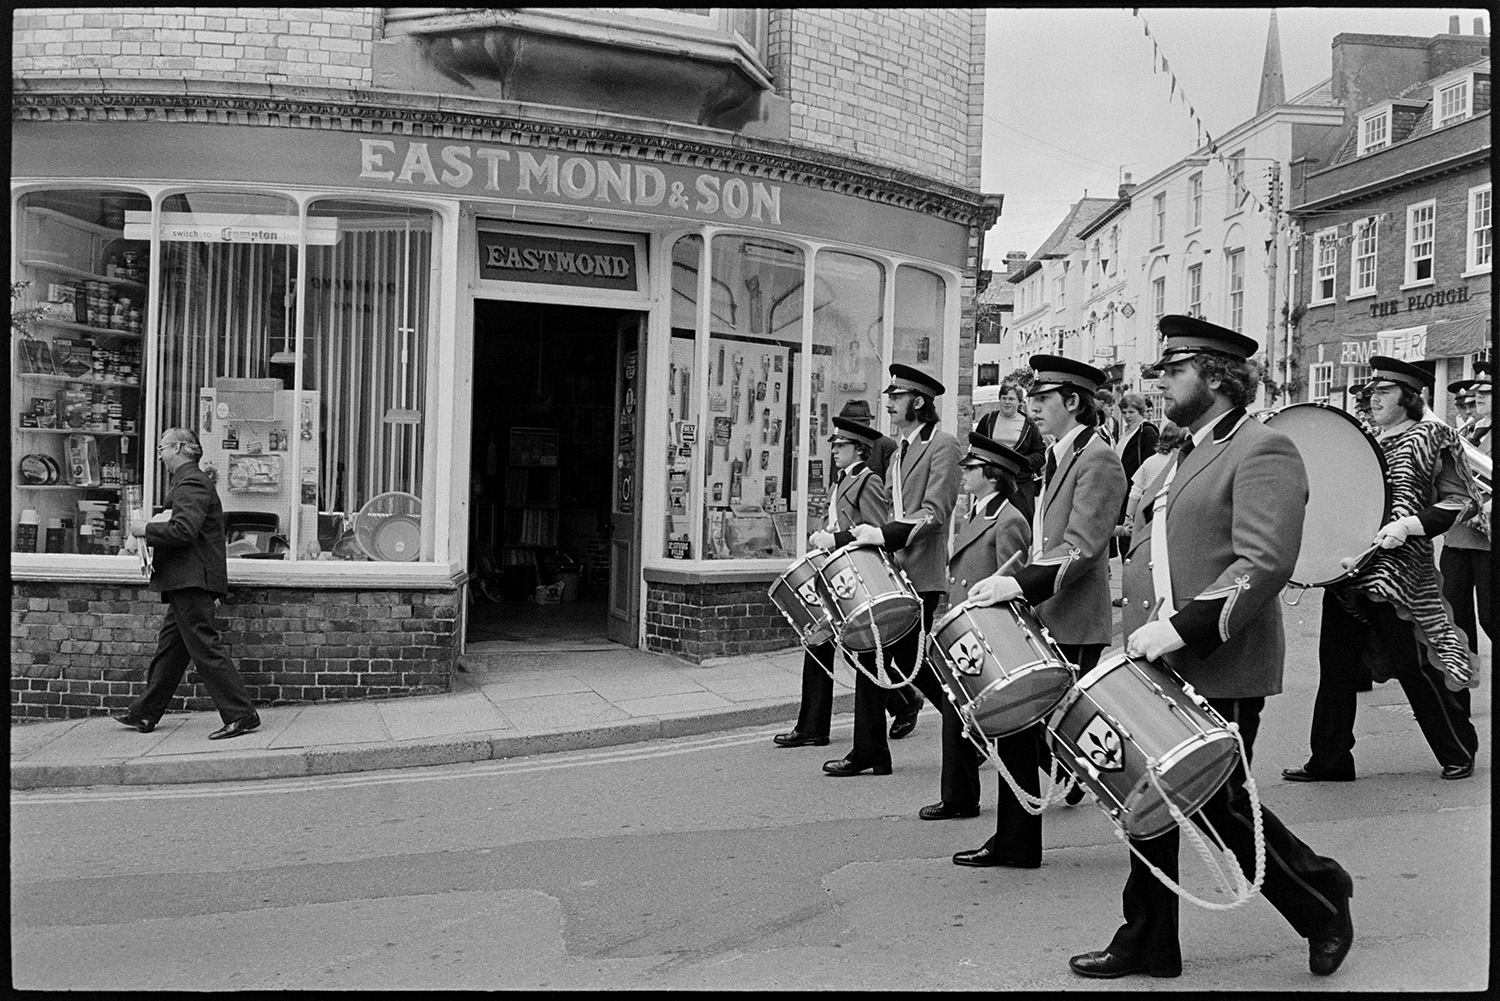 Mayors and dignitaries in parade round town making proclamation at points, town crier. 
[A marching band of drummers parading through Torrington for the Torrington Mayfair. They are passing the shop front of Eastmond & Son, hardware shop.]